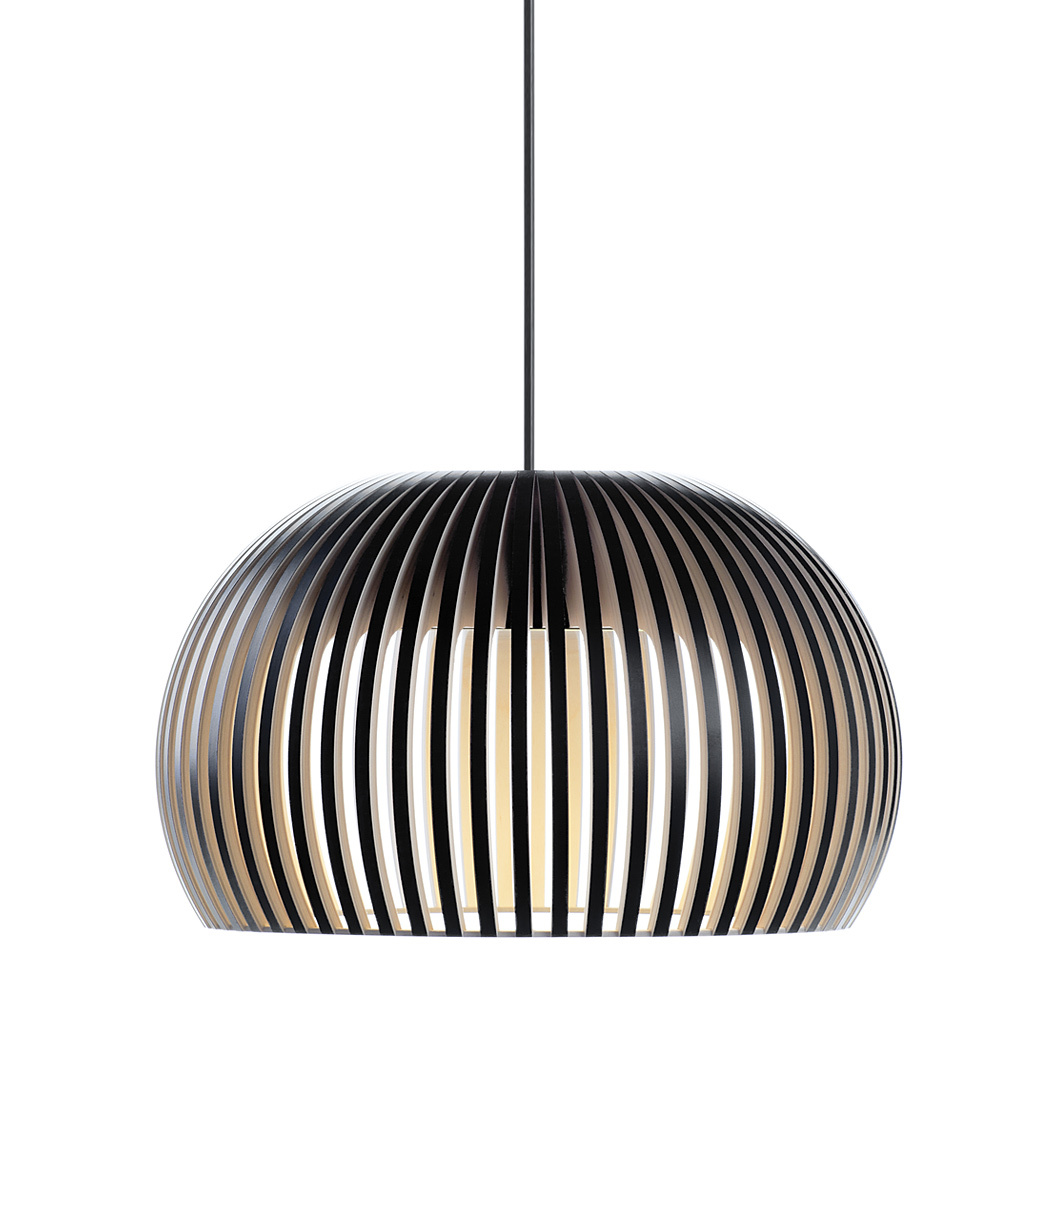 Atto 5000 pendant lamp is available in black laminated